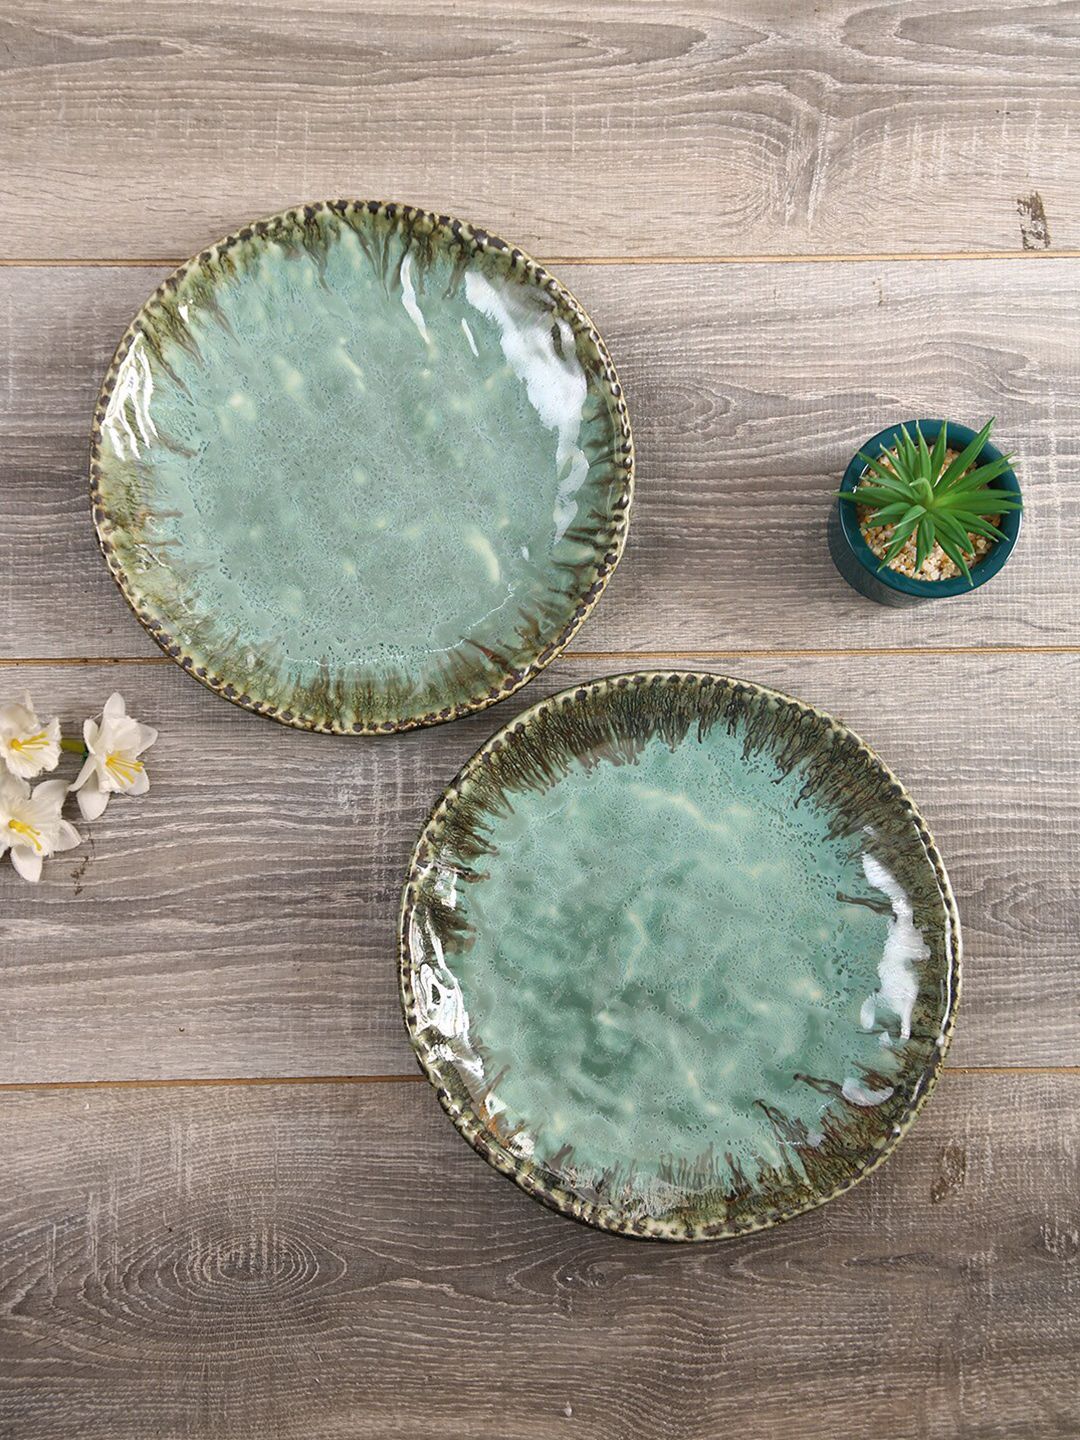 Aapno Rajasthan Green 2 Pieces Textured Ceramic Glossy Plates Price in India